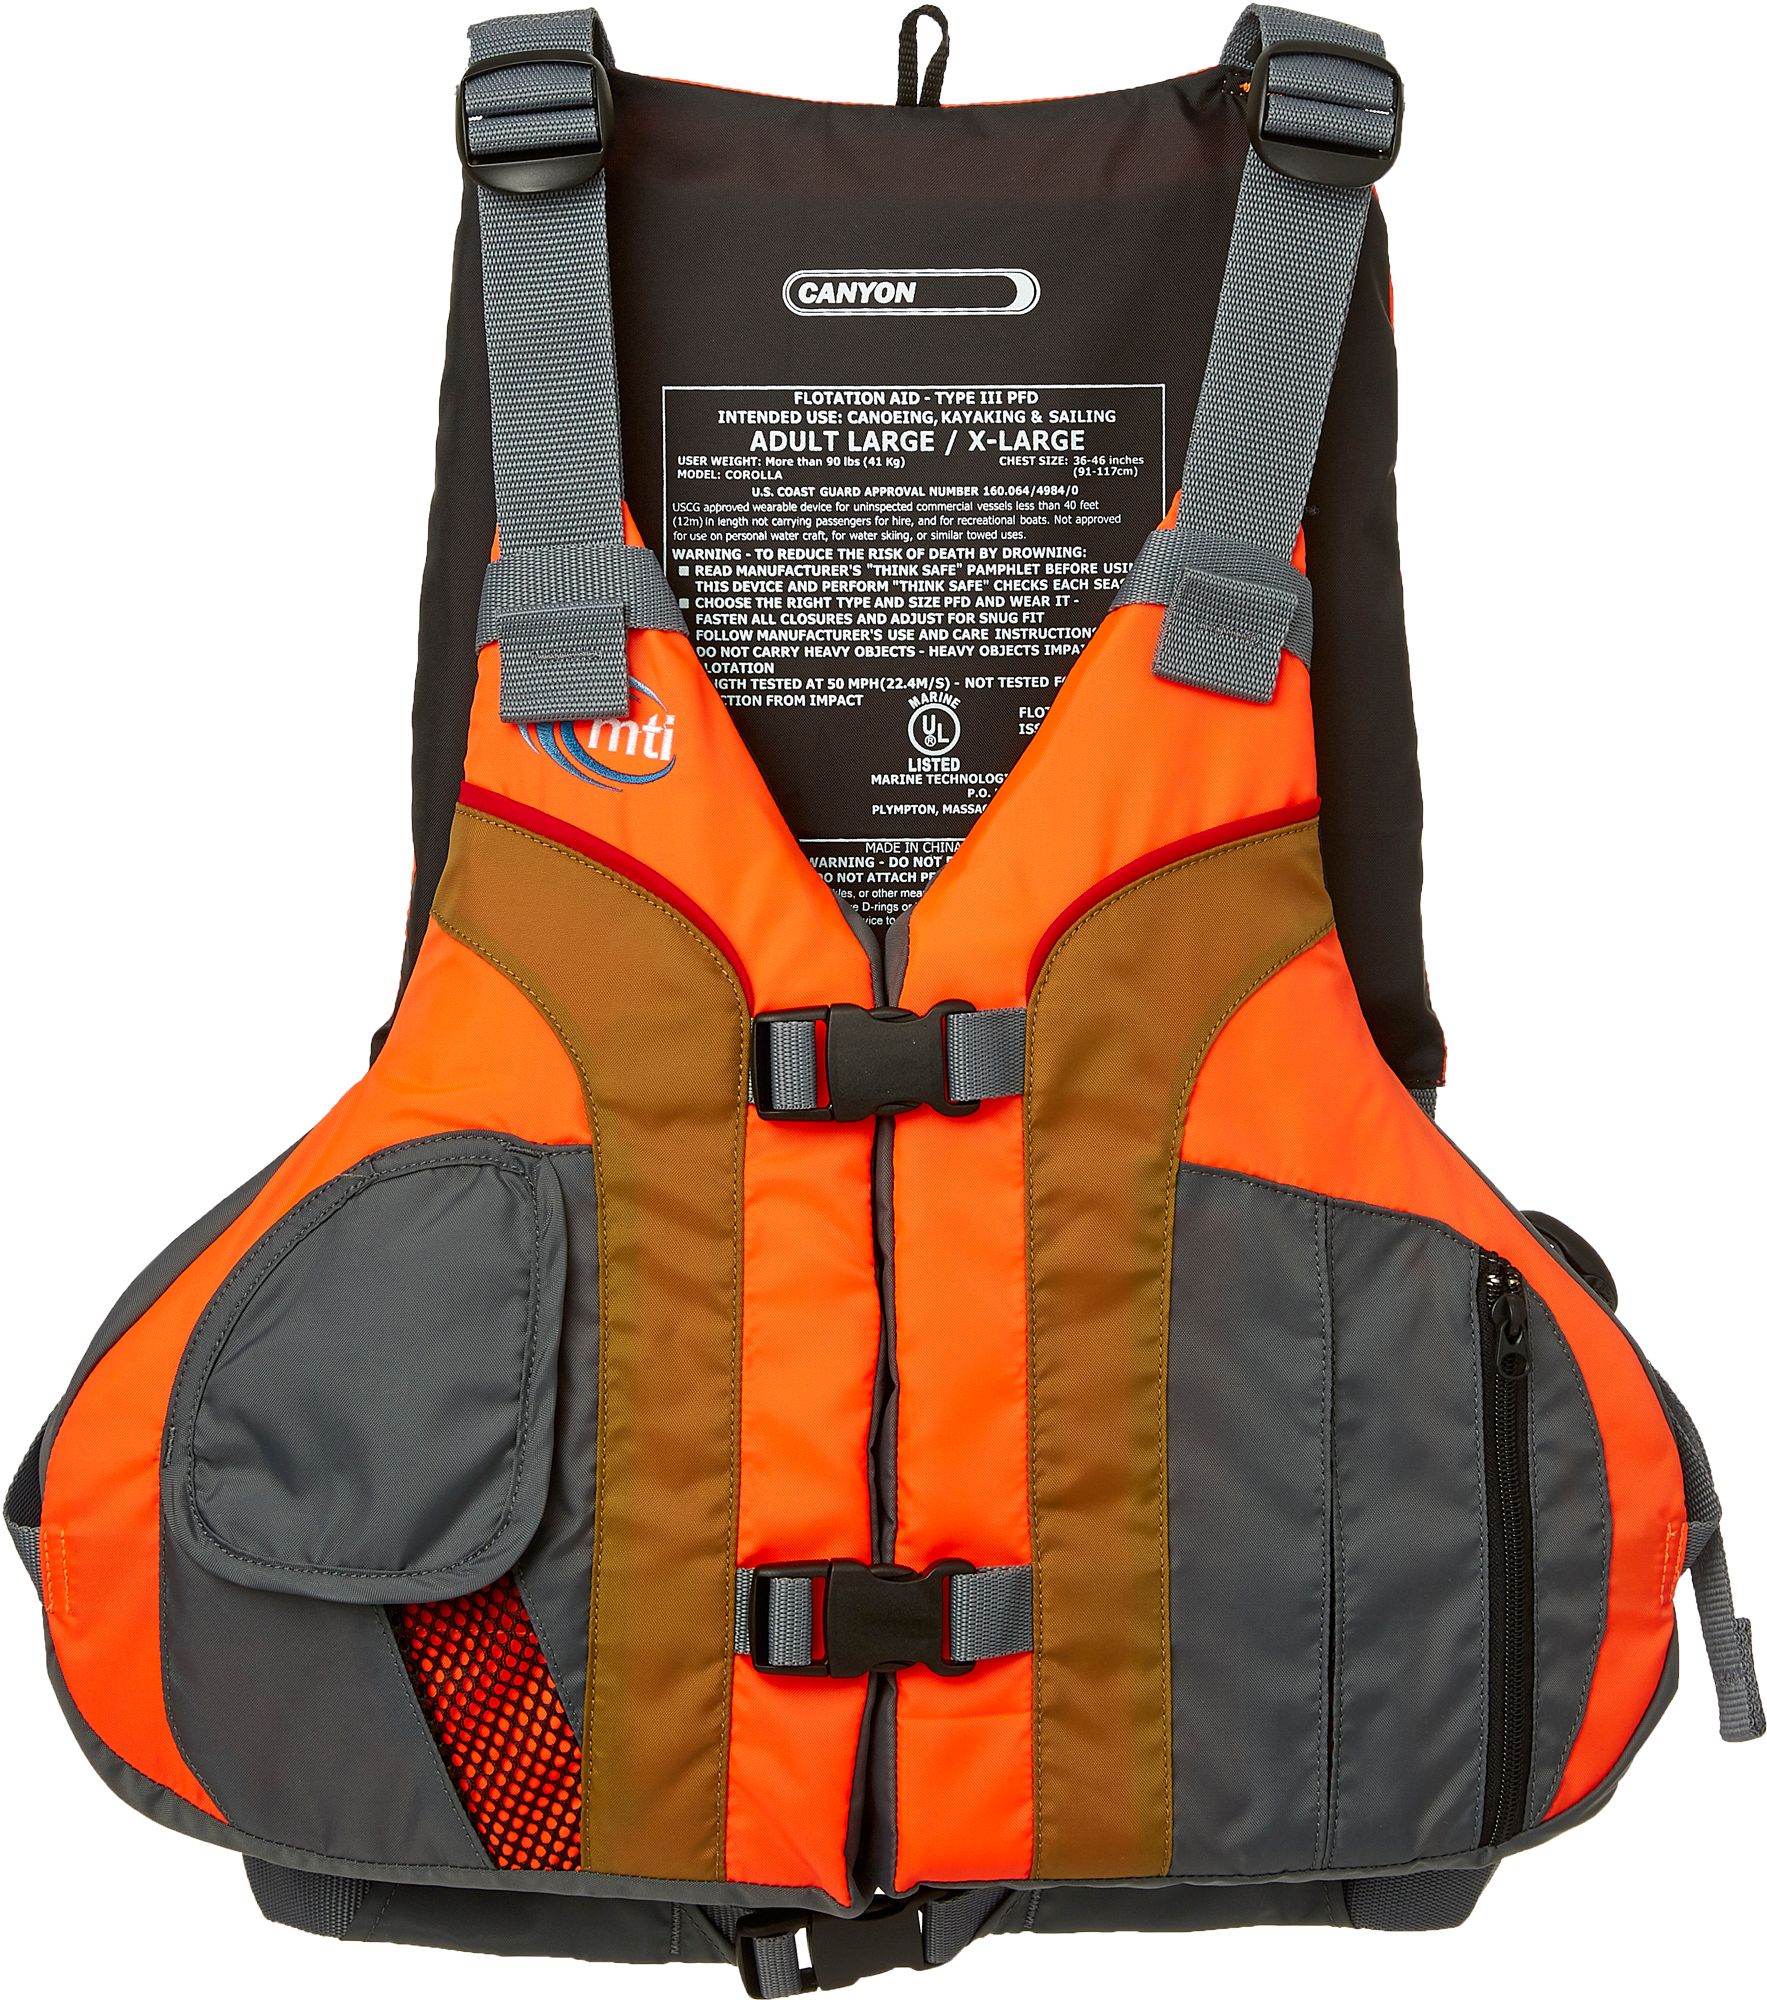 Kayak life jackets for adults